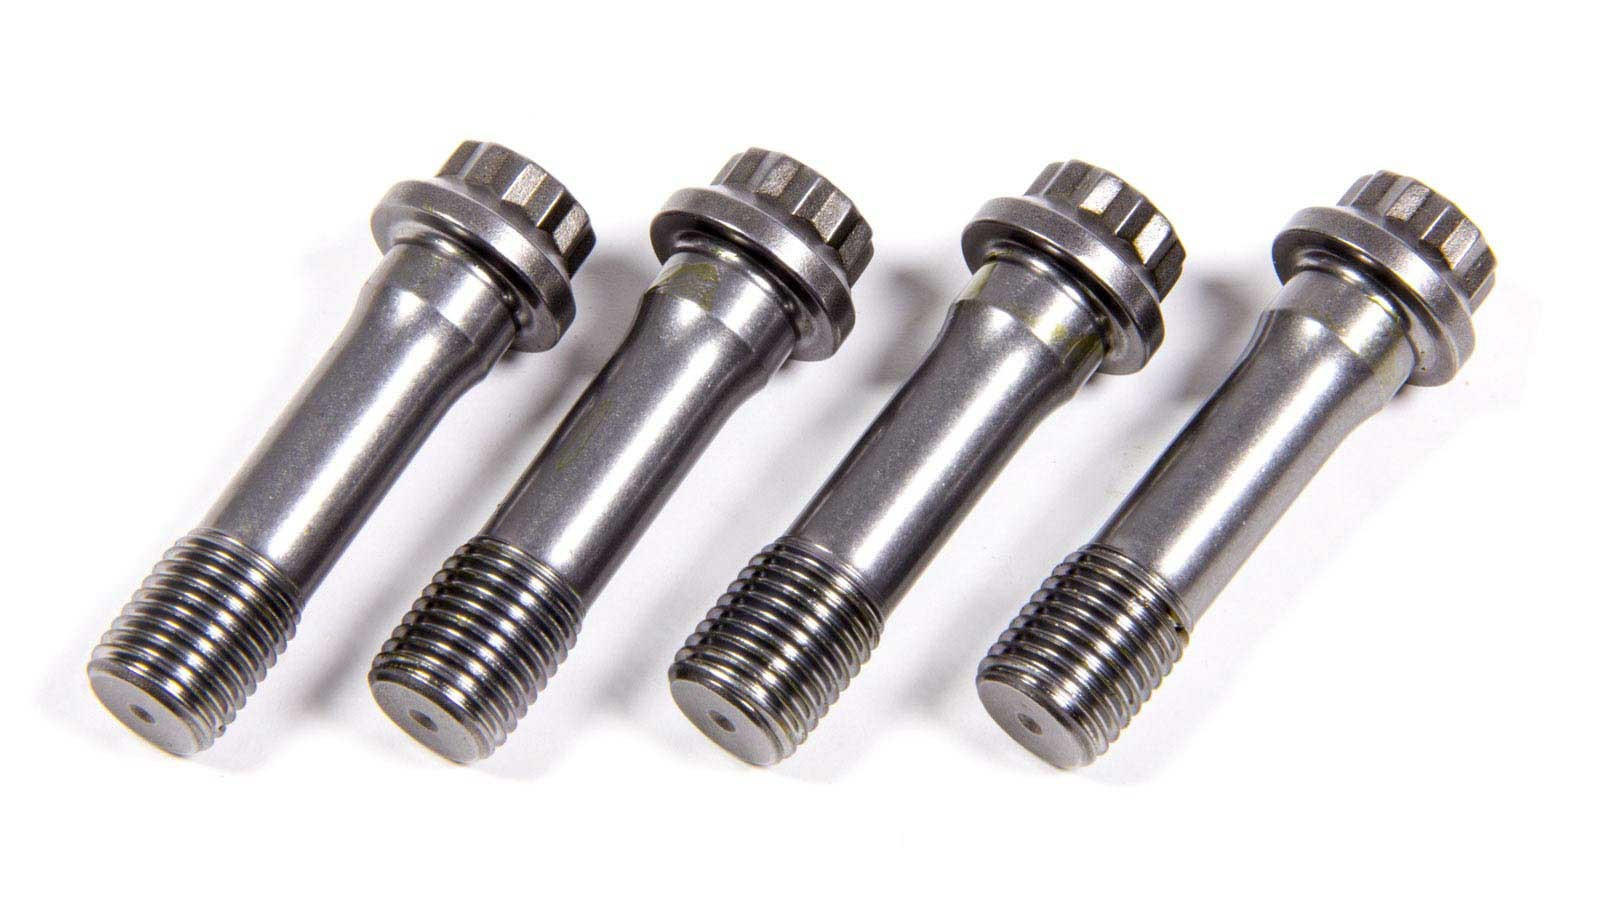 Manley 42249-4 Connecting Rod Bolt Kit, 7/16 in Bolt, 1.600 in Long, 12 Point Head, ARP 2000, Set of 4